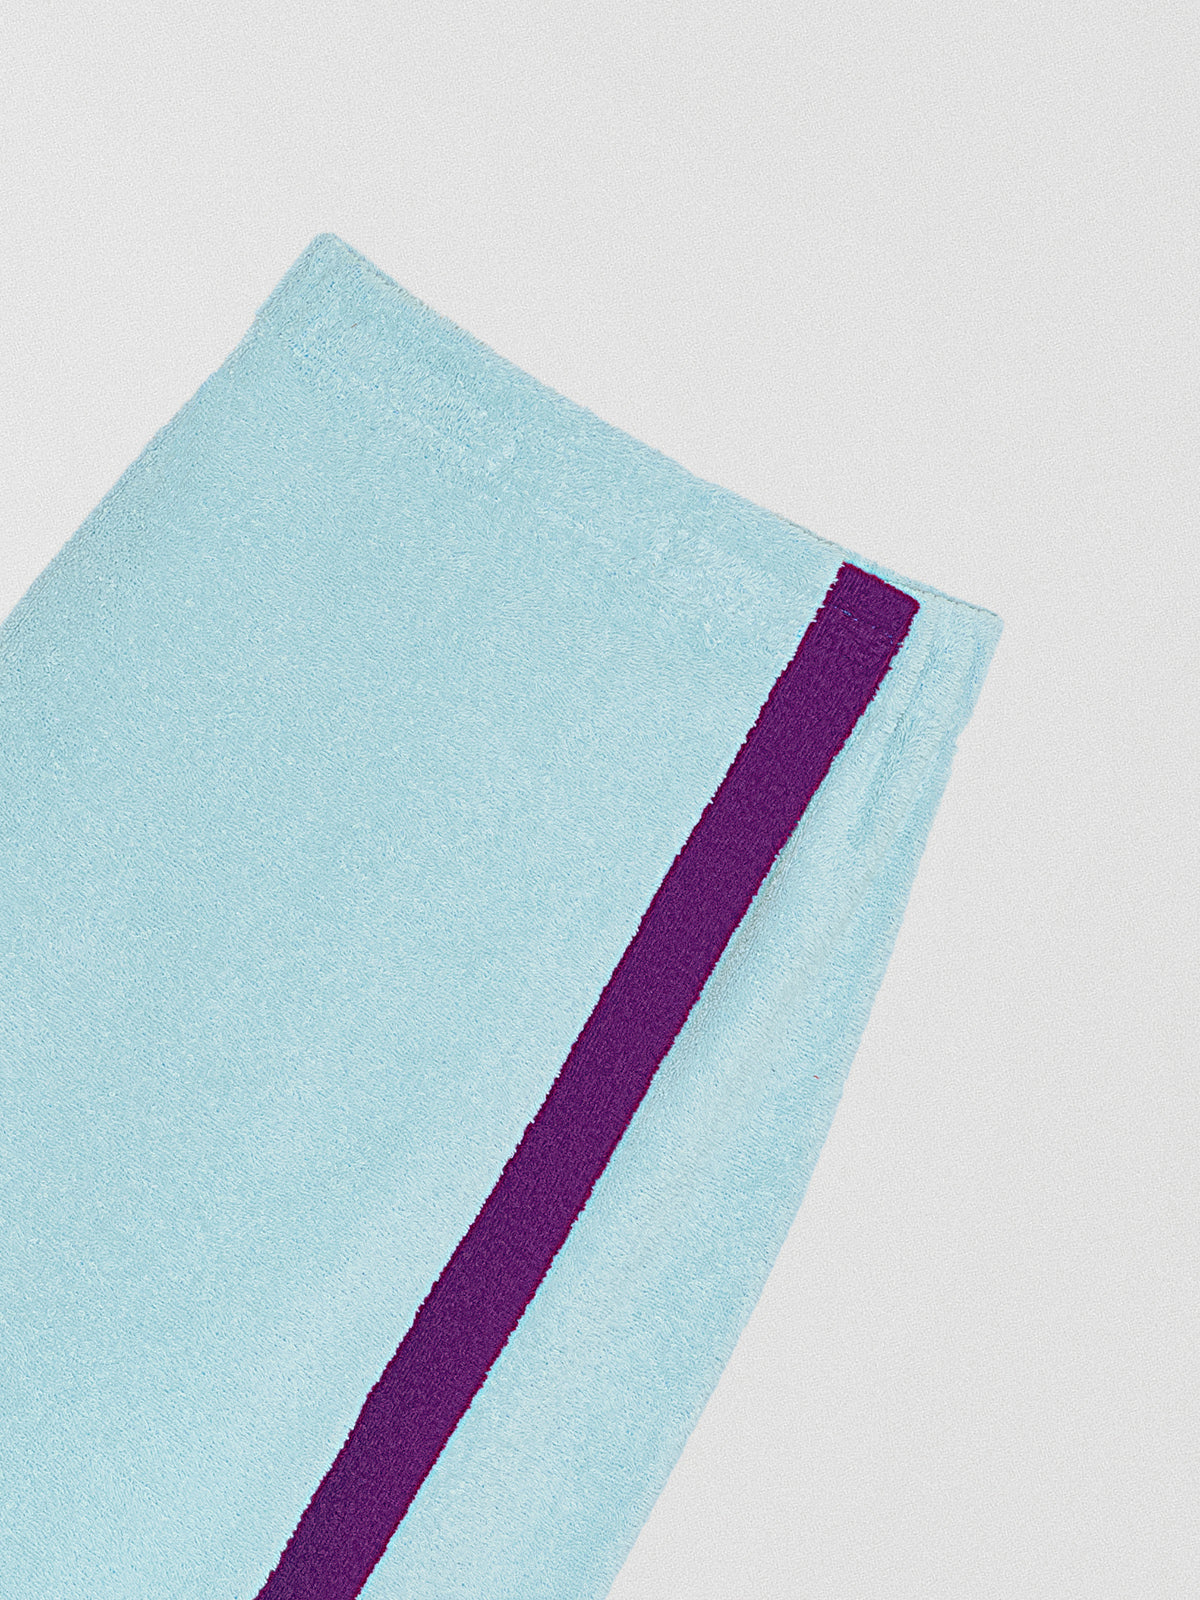 Pareo towel skirt made in blue cotton with purple band.